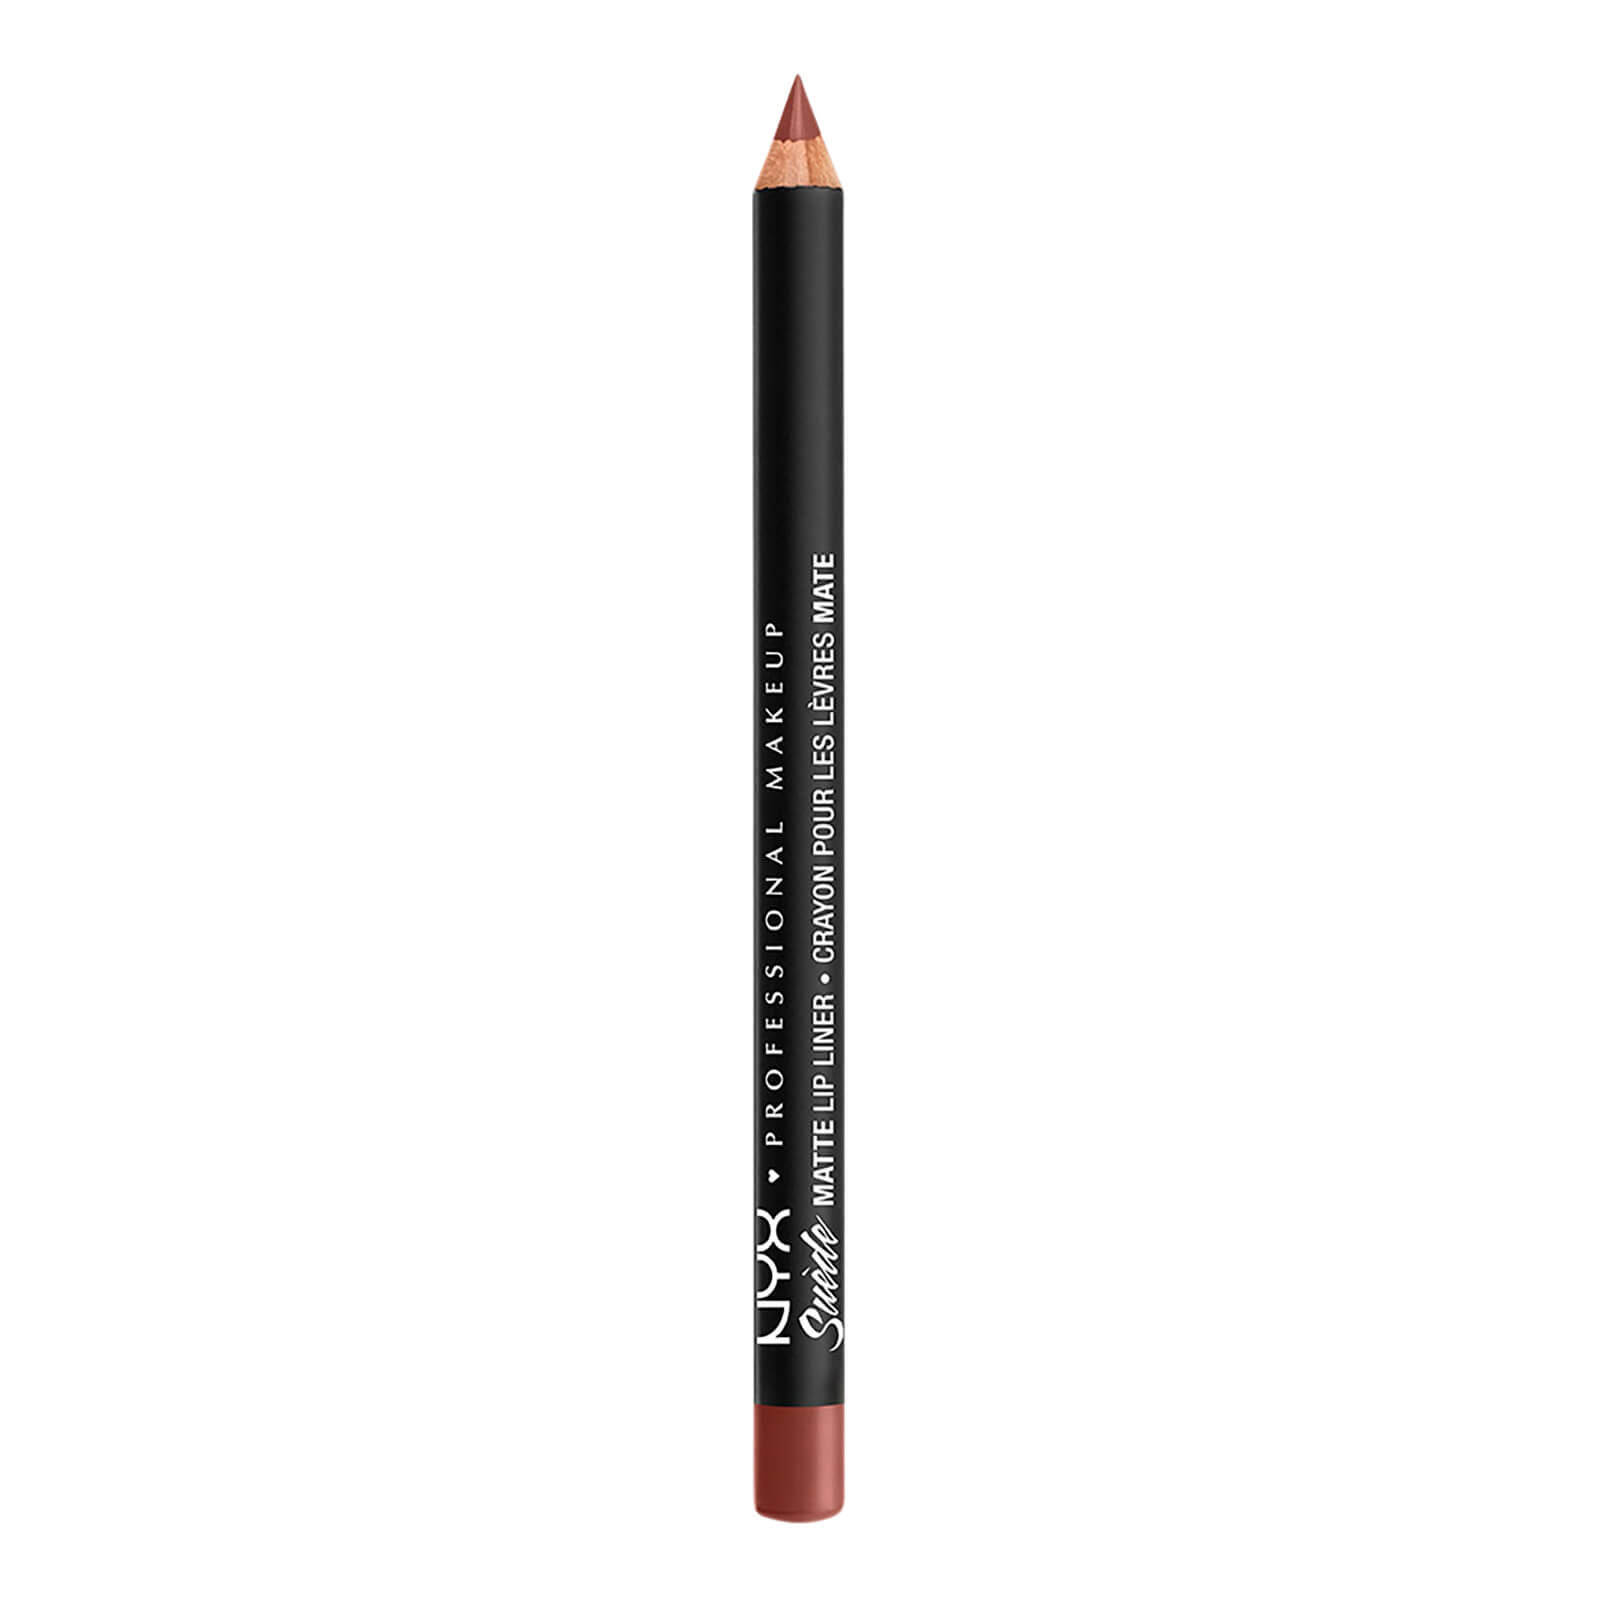 NYX Professional Makeup Suede Matte Lip Liner 1g (Various Shades) - Alabama - Deep Purple Red